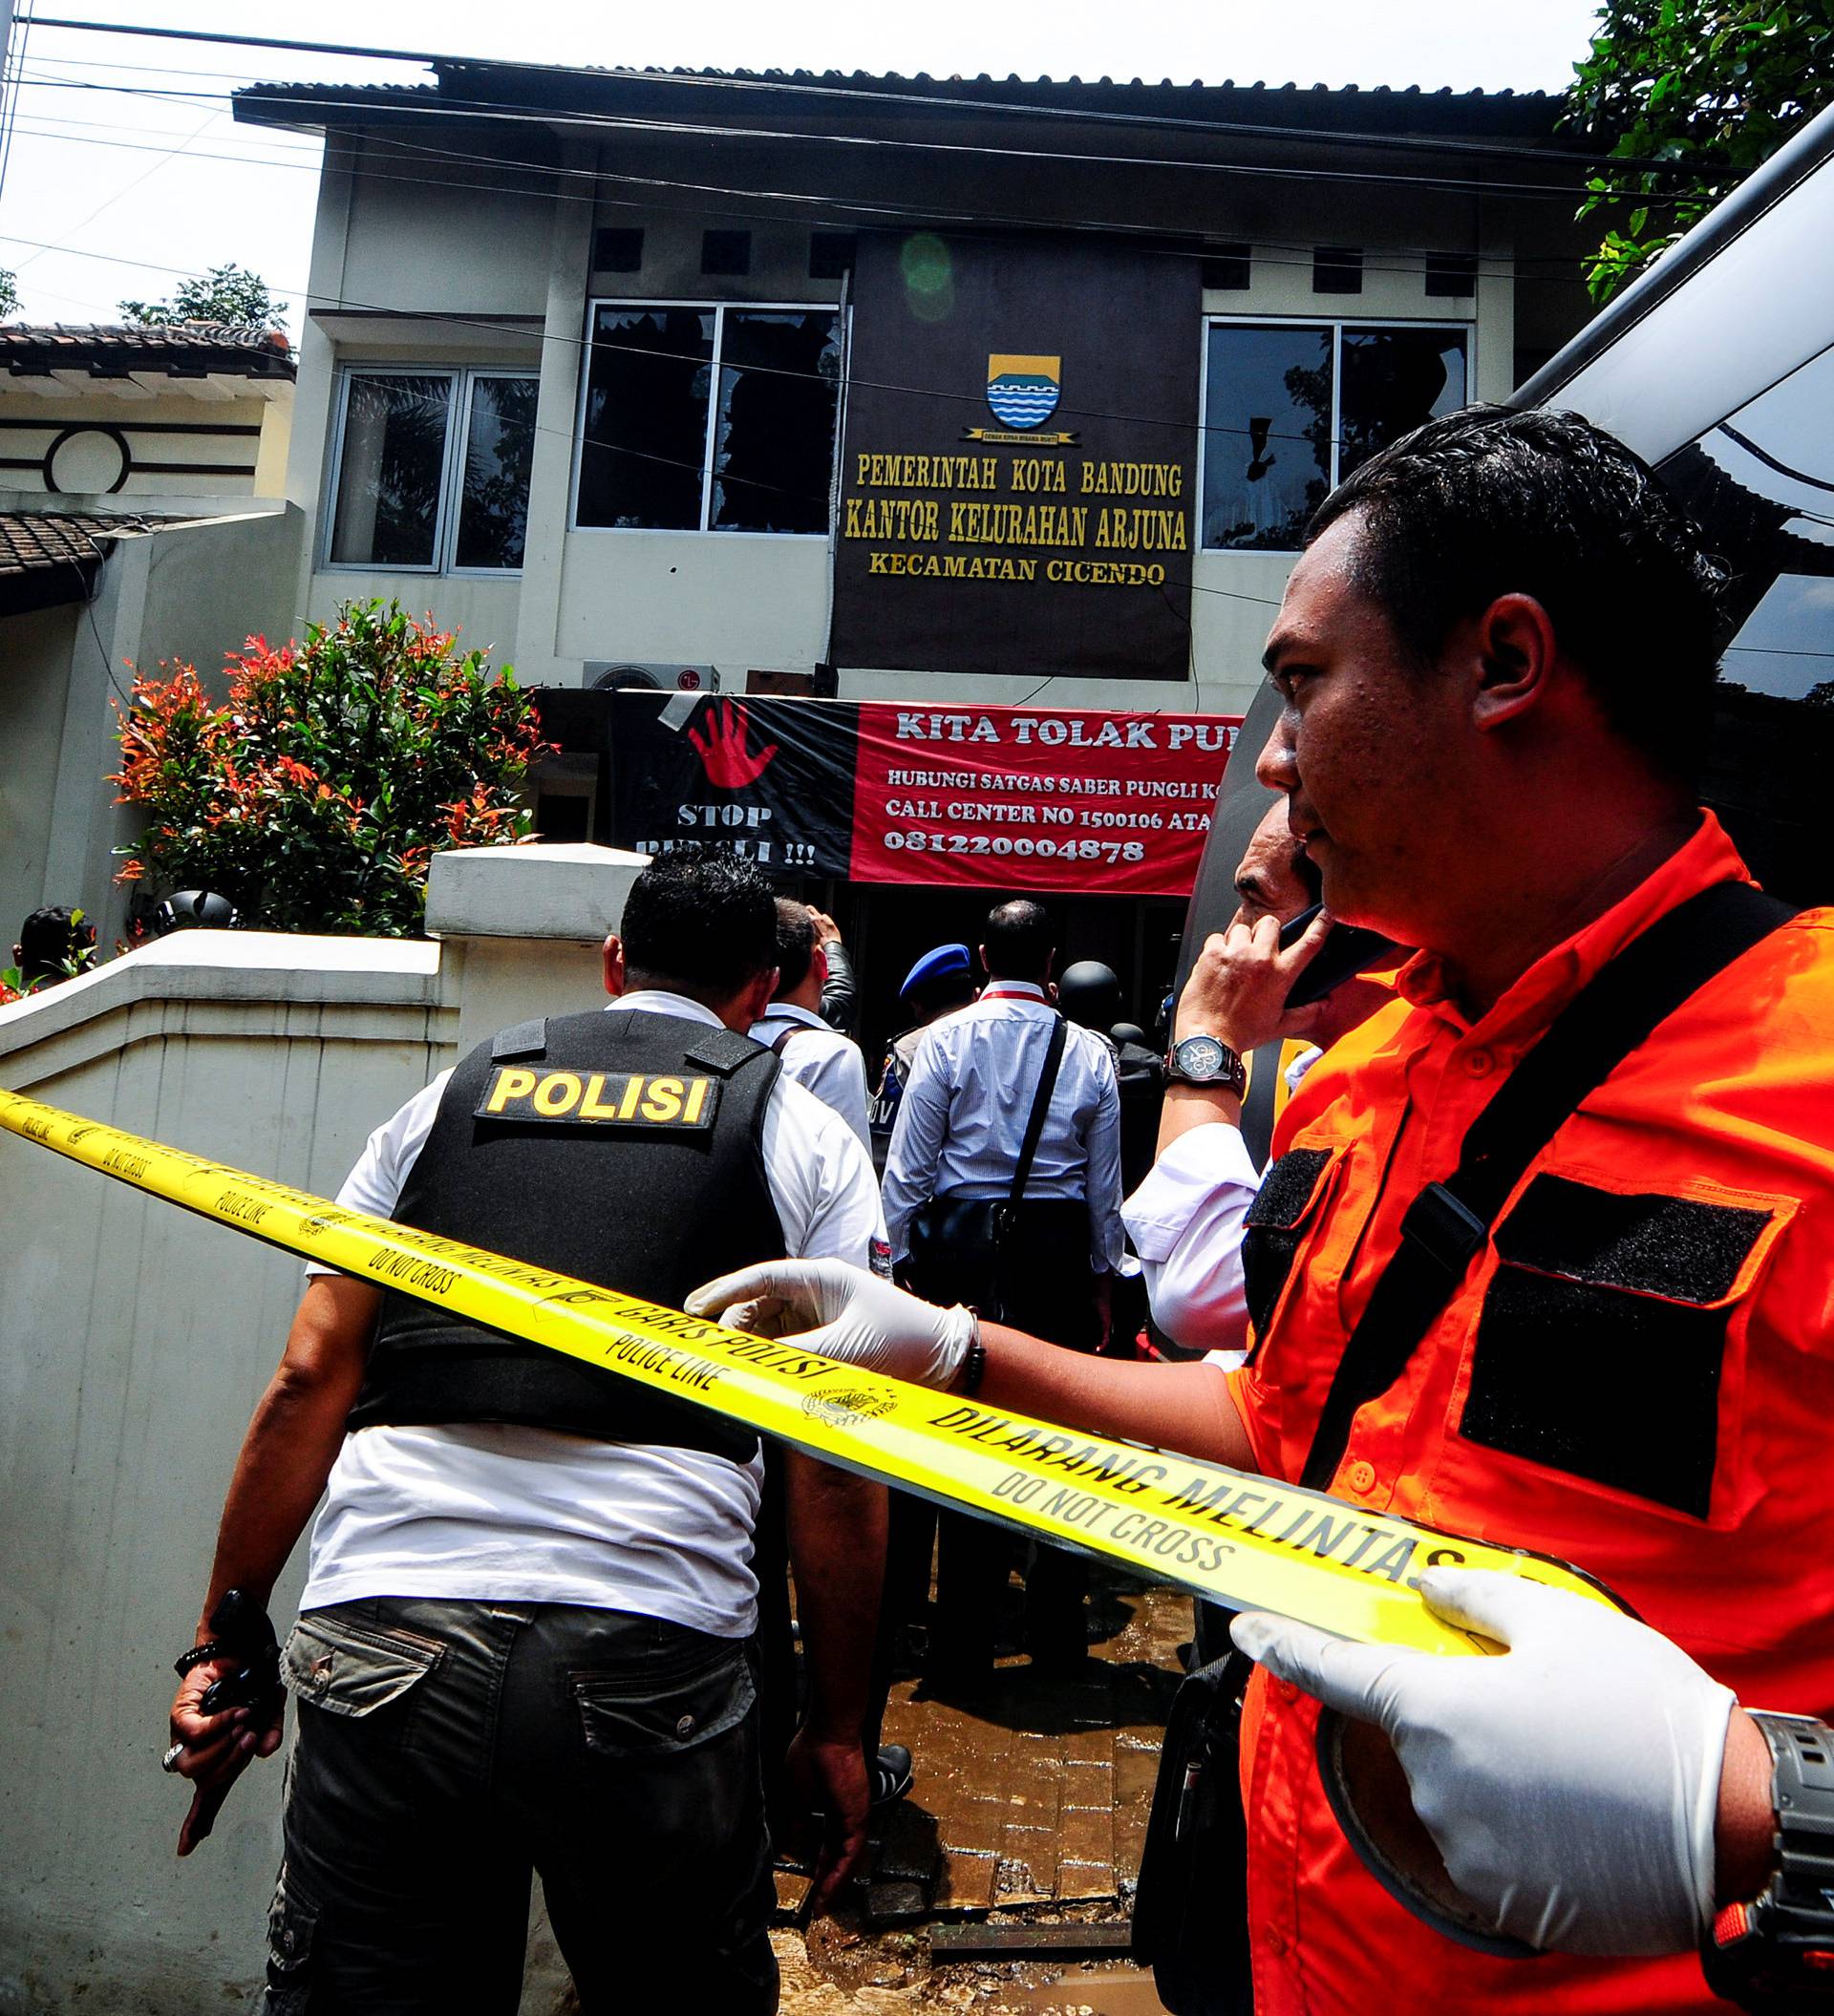 Police secure the area around  a local government office following an explosion in Bandung, West Java, Indonesia